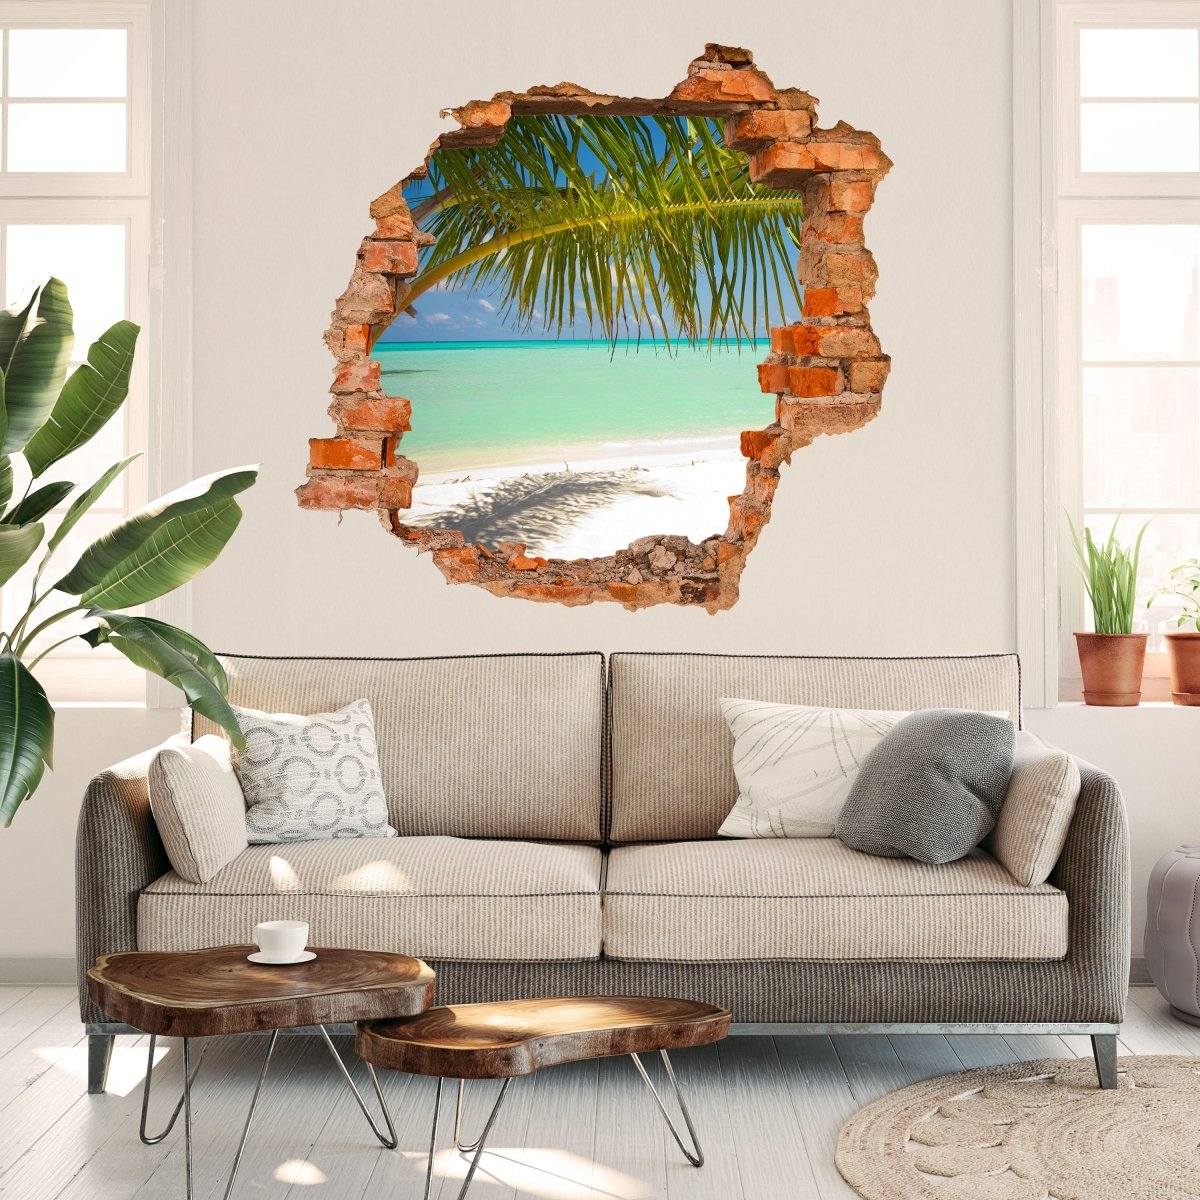 3D Wall Sticker On The Beach - Wall Decal M0448